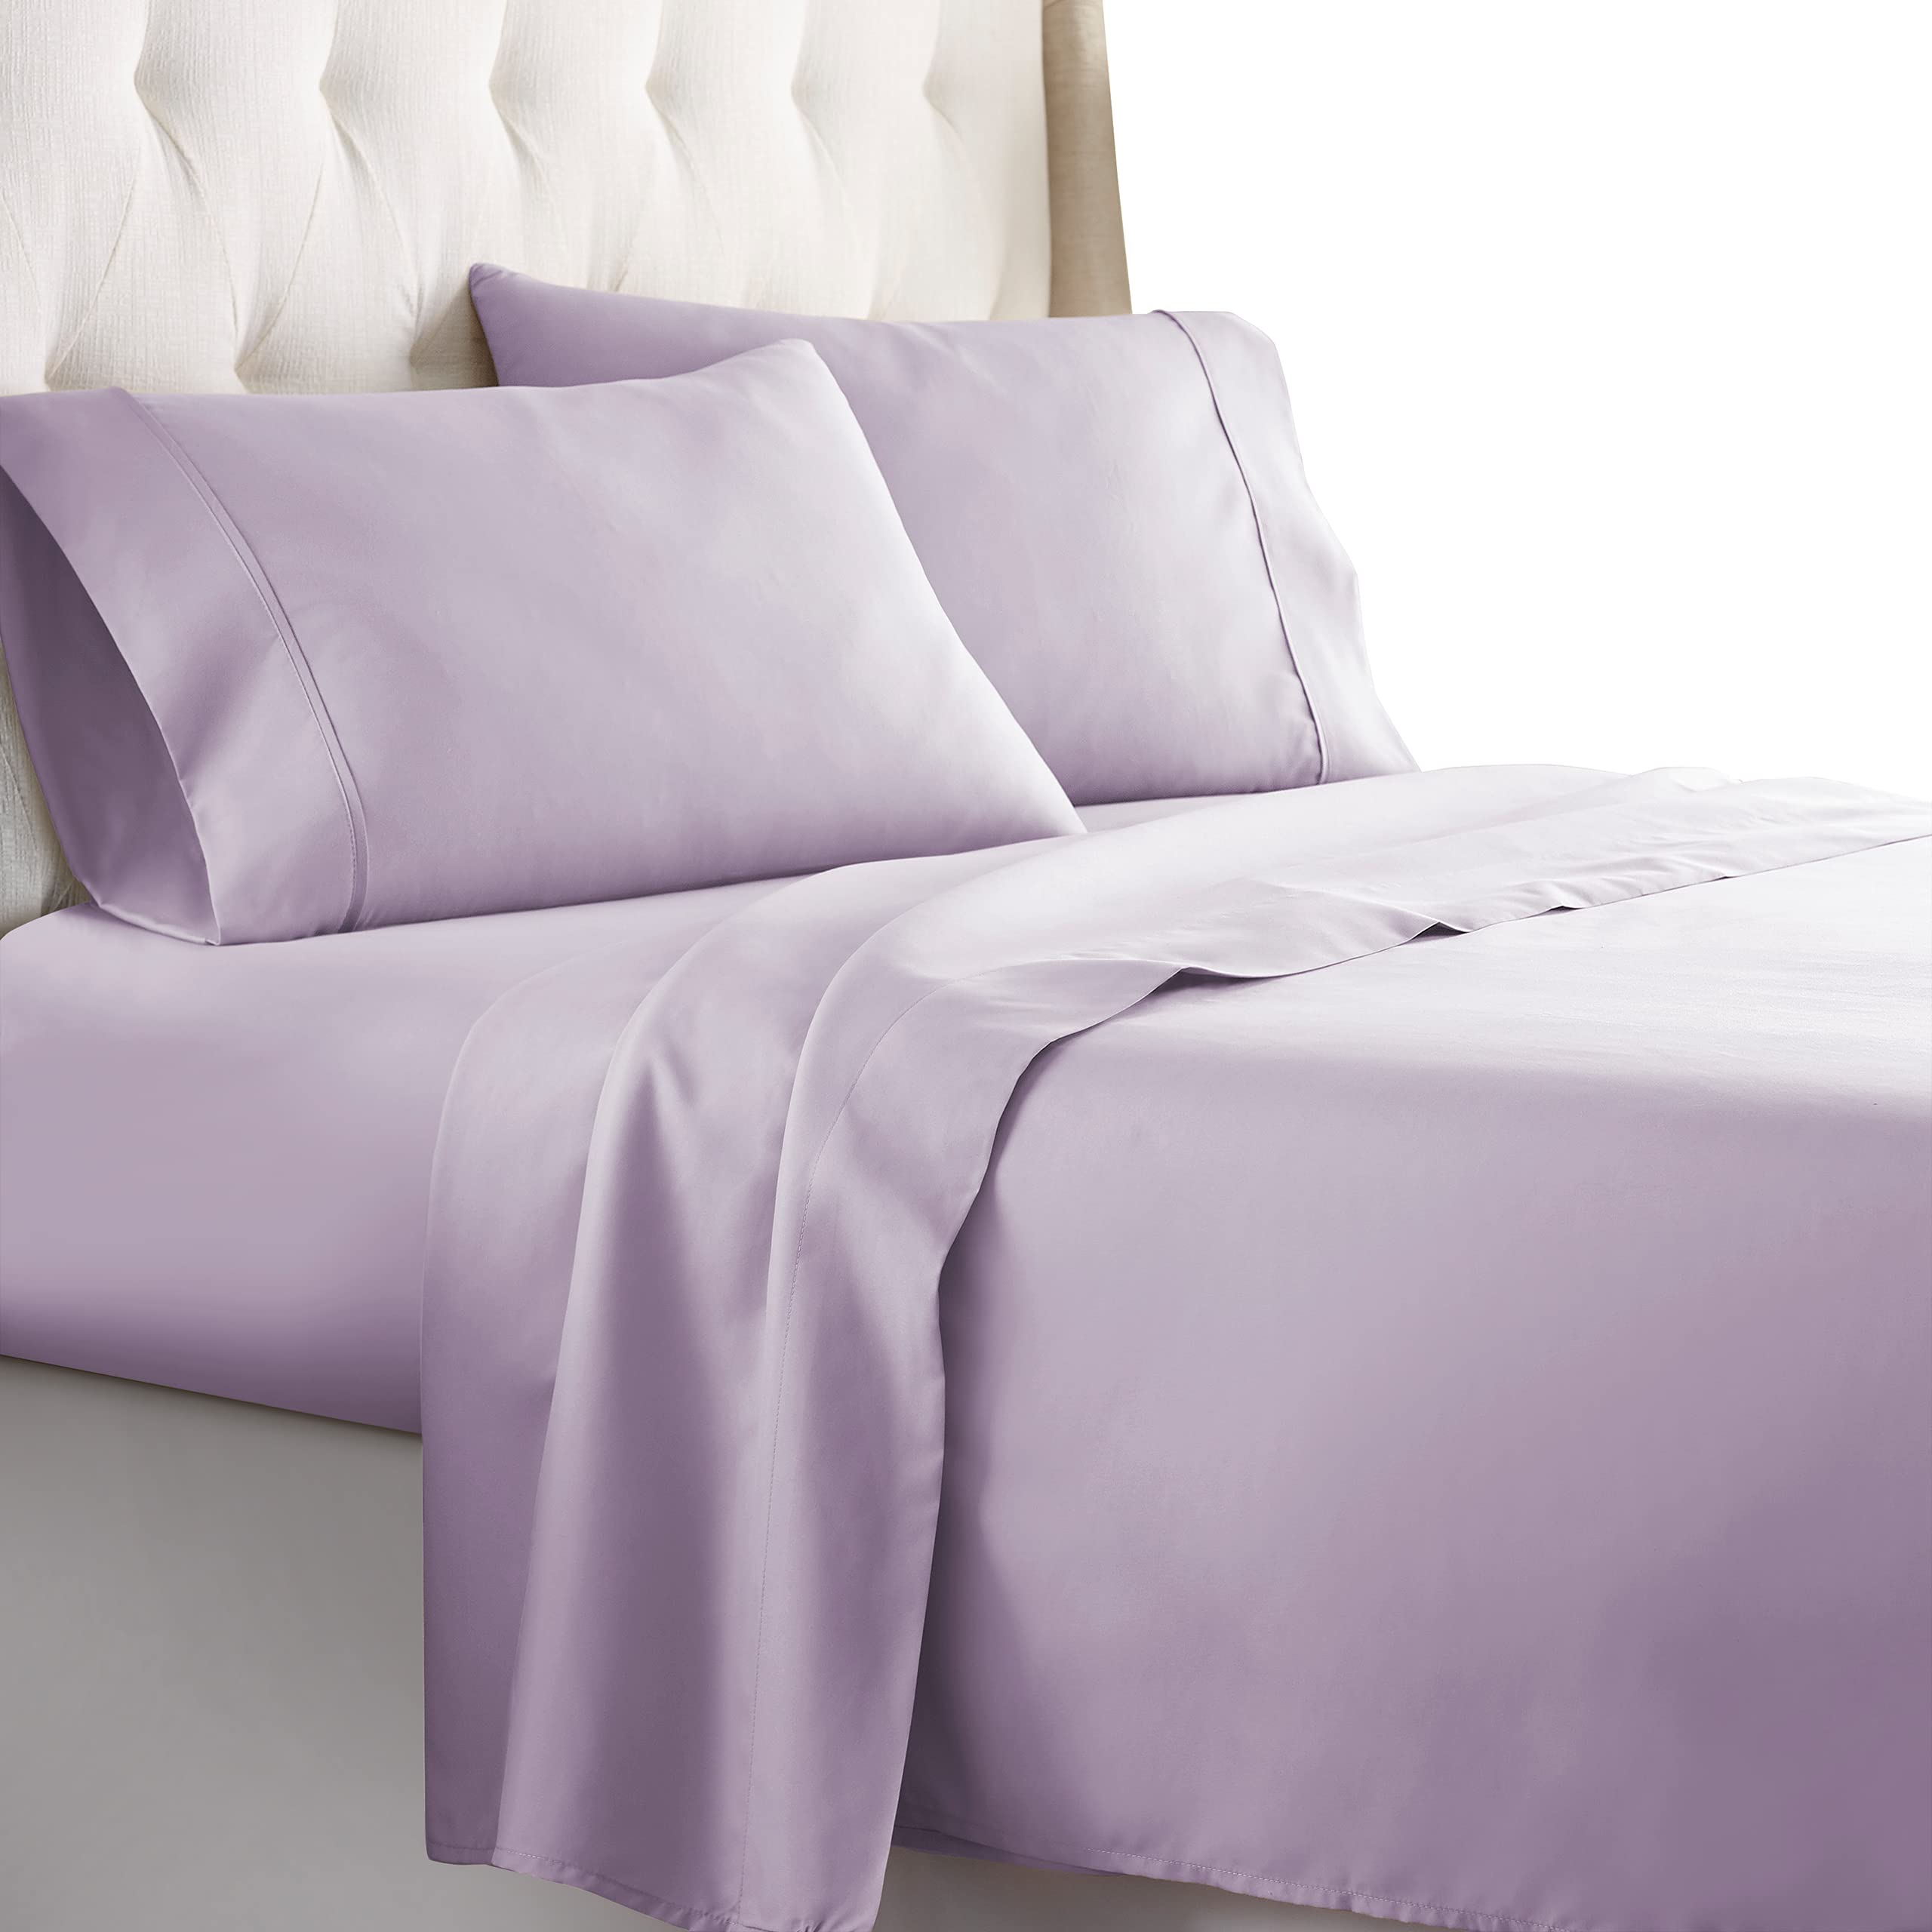 Book Cover HC COLLECTION 1800 Series Bedding Sheets & Pillowcases Bed Linen Set with 16 inch Deep Pockets, Twin, Lavender Lavender Twin